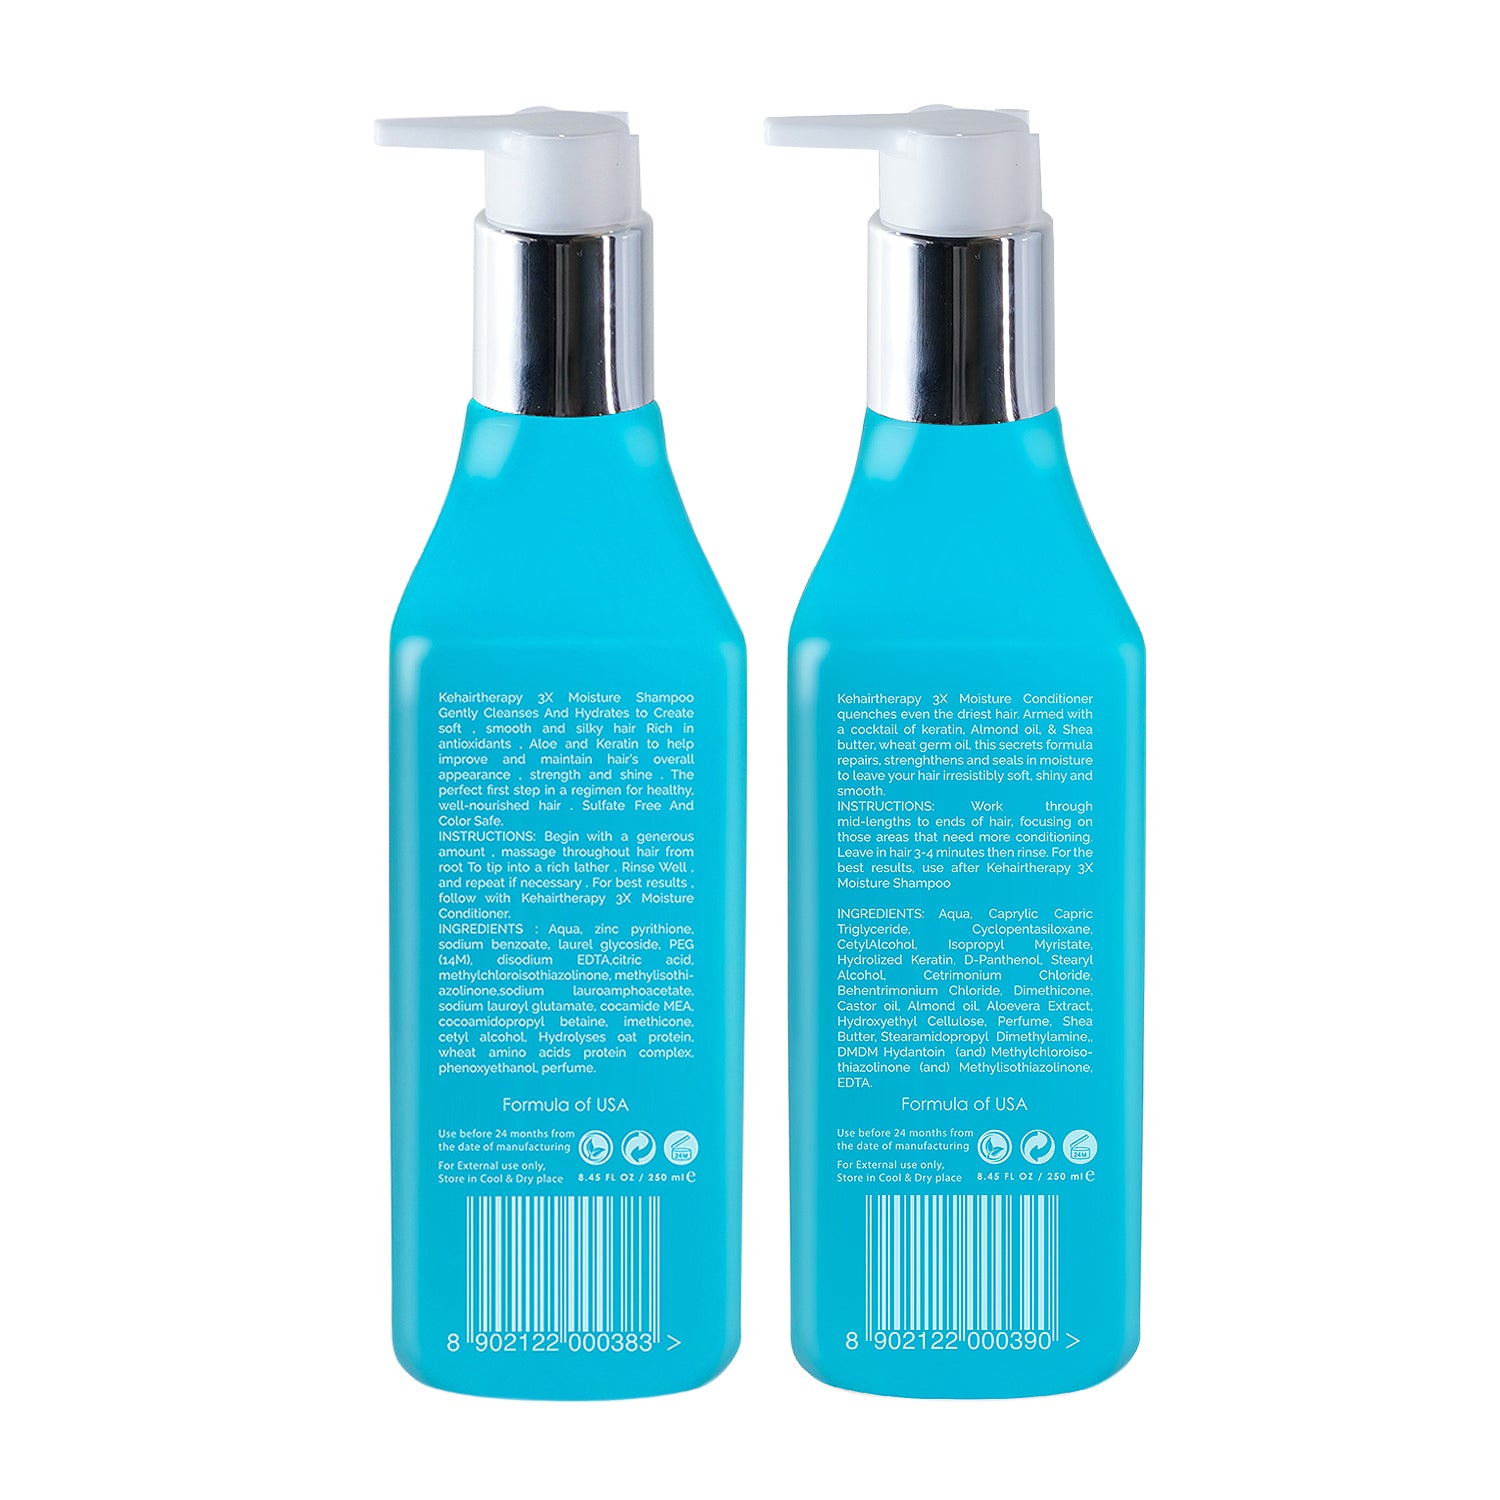 KT Professional 3x Shampoo &amp; Conditioner (pack of 2) 500 ml